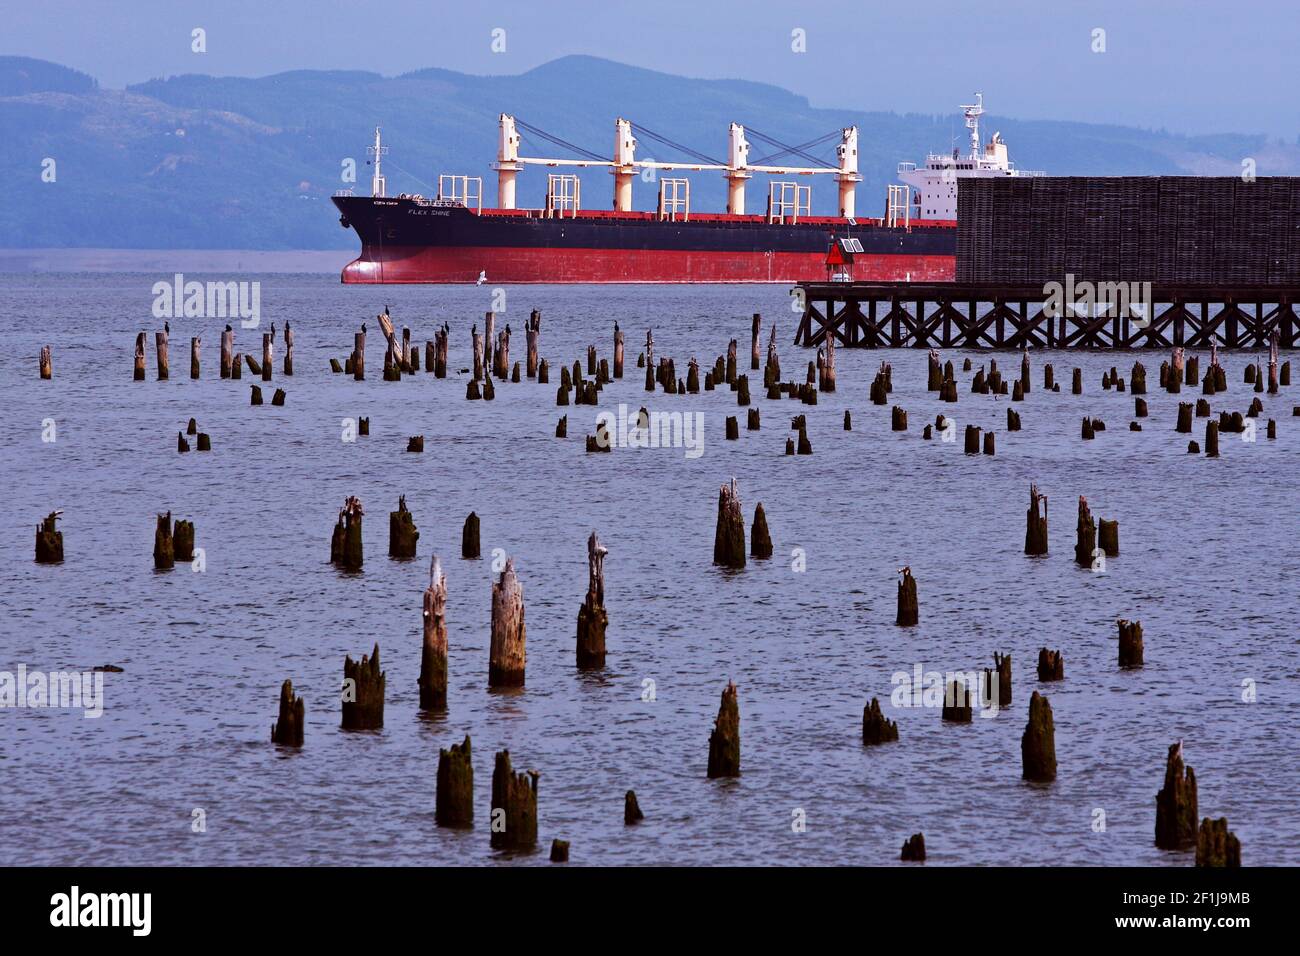 A cargo ship and stumps on Youngs River, Oregon. Stock Photo